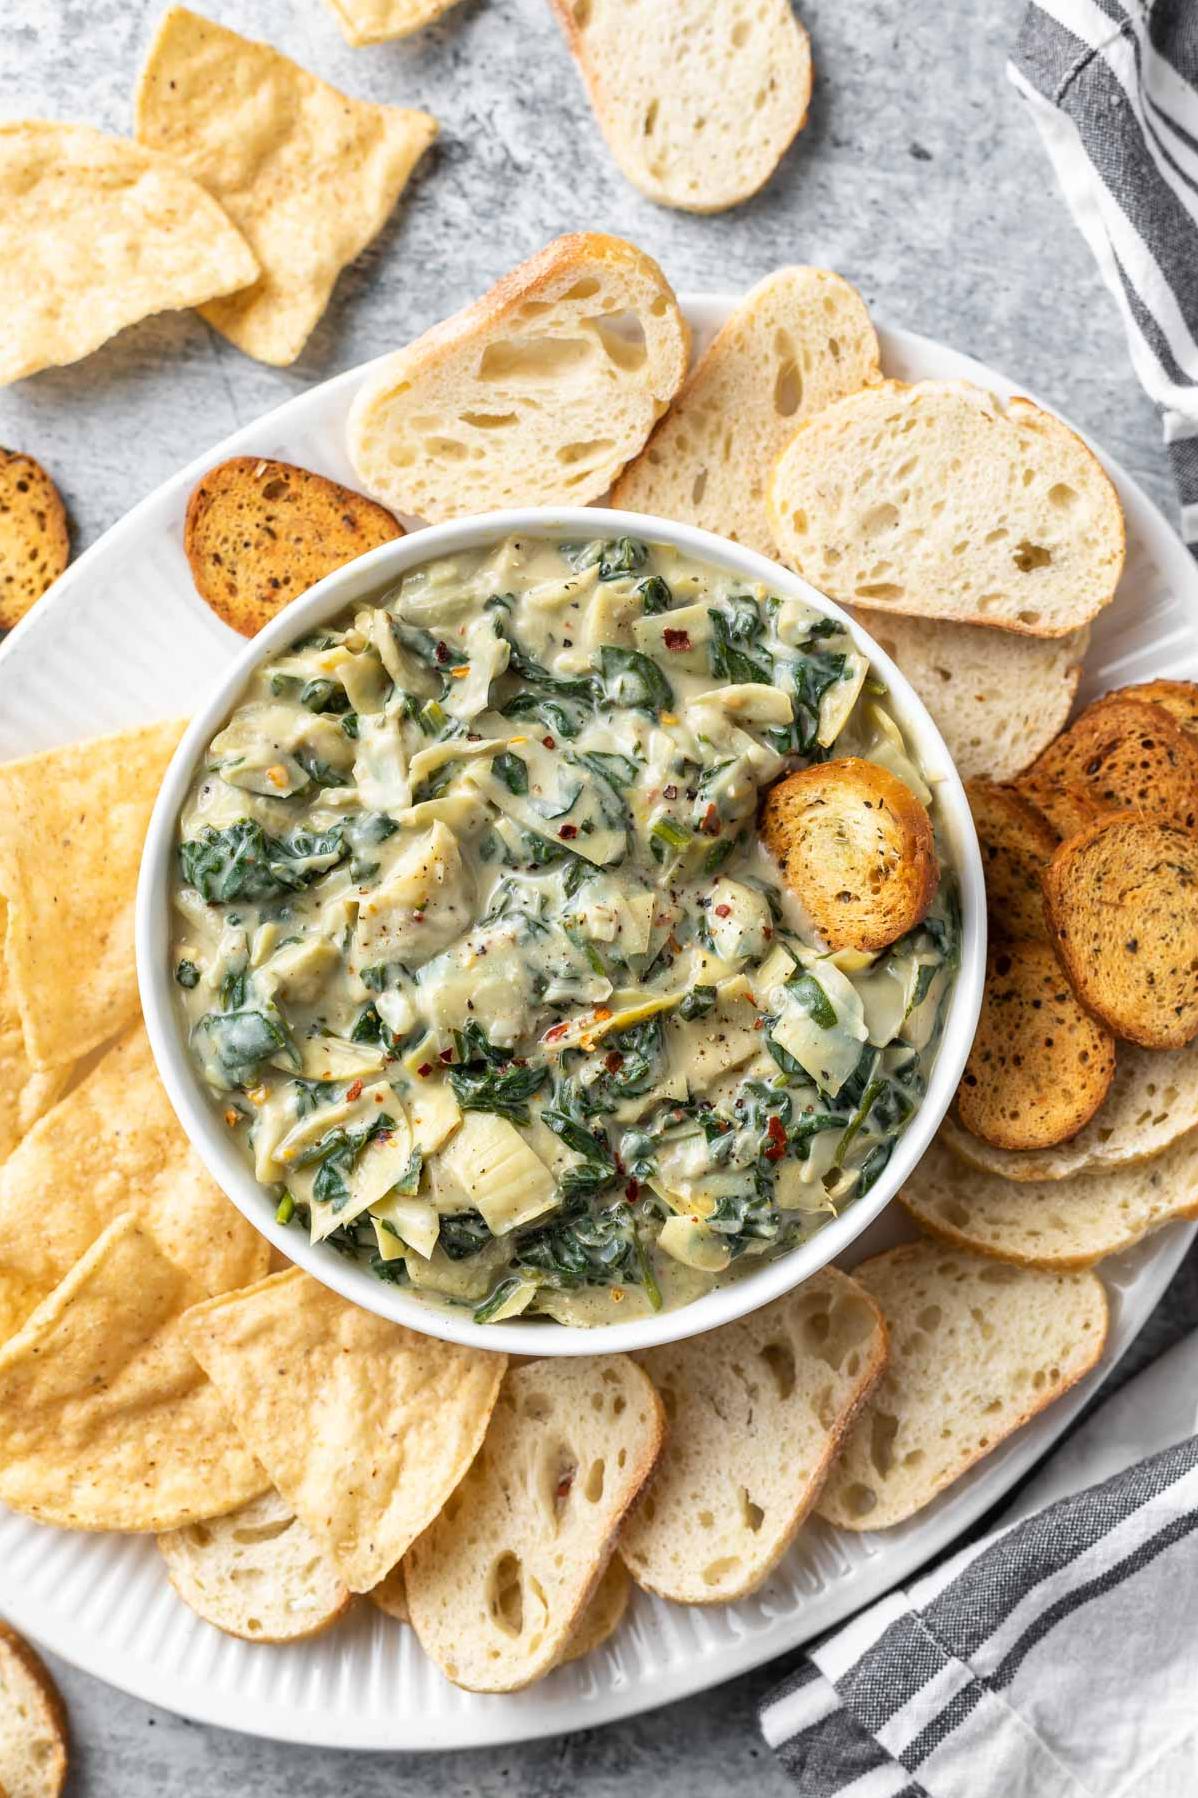  Who needs cheese when you can have this amazing Artichoke Dip!